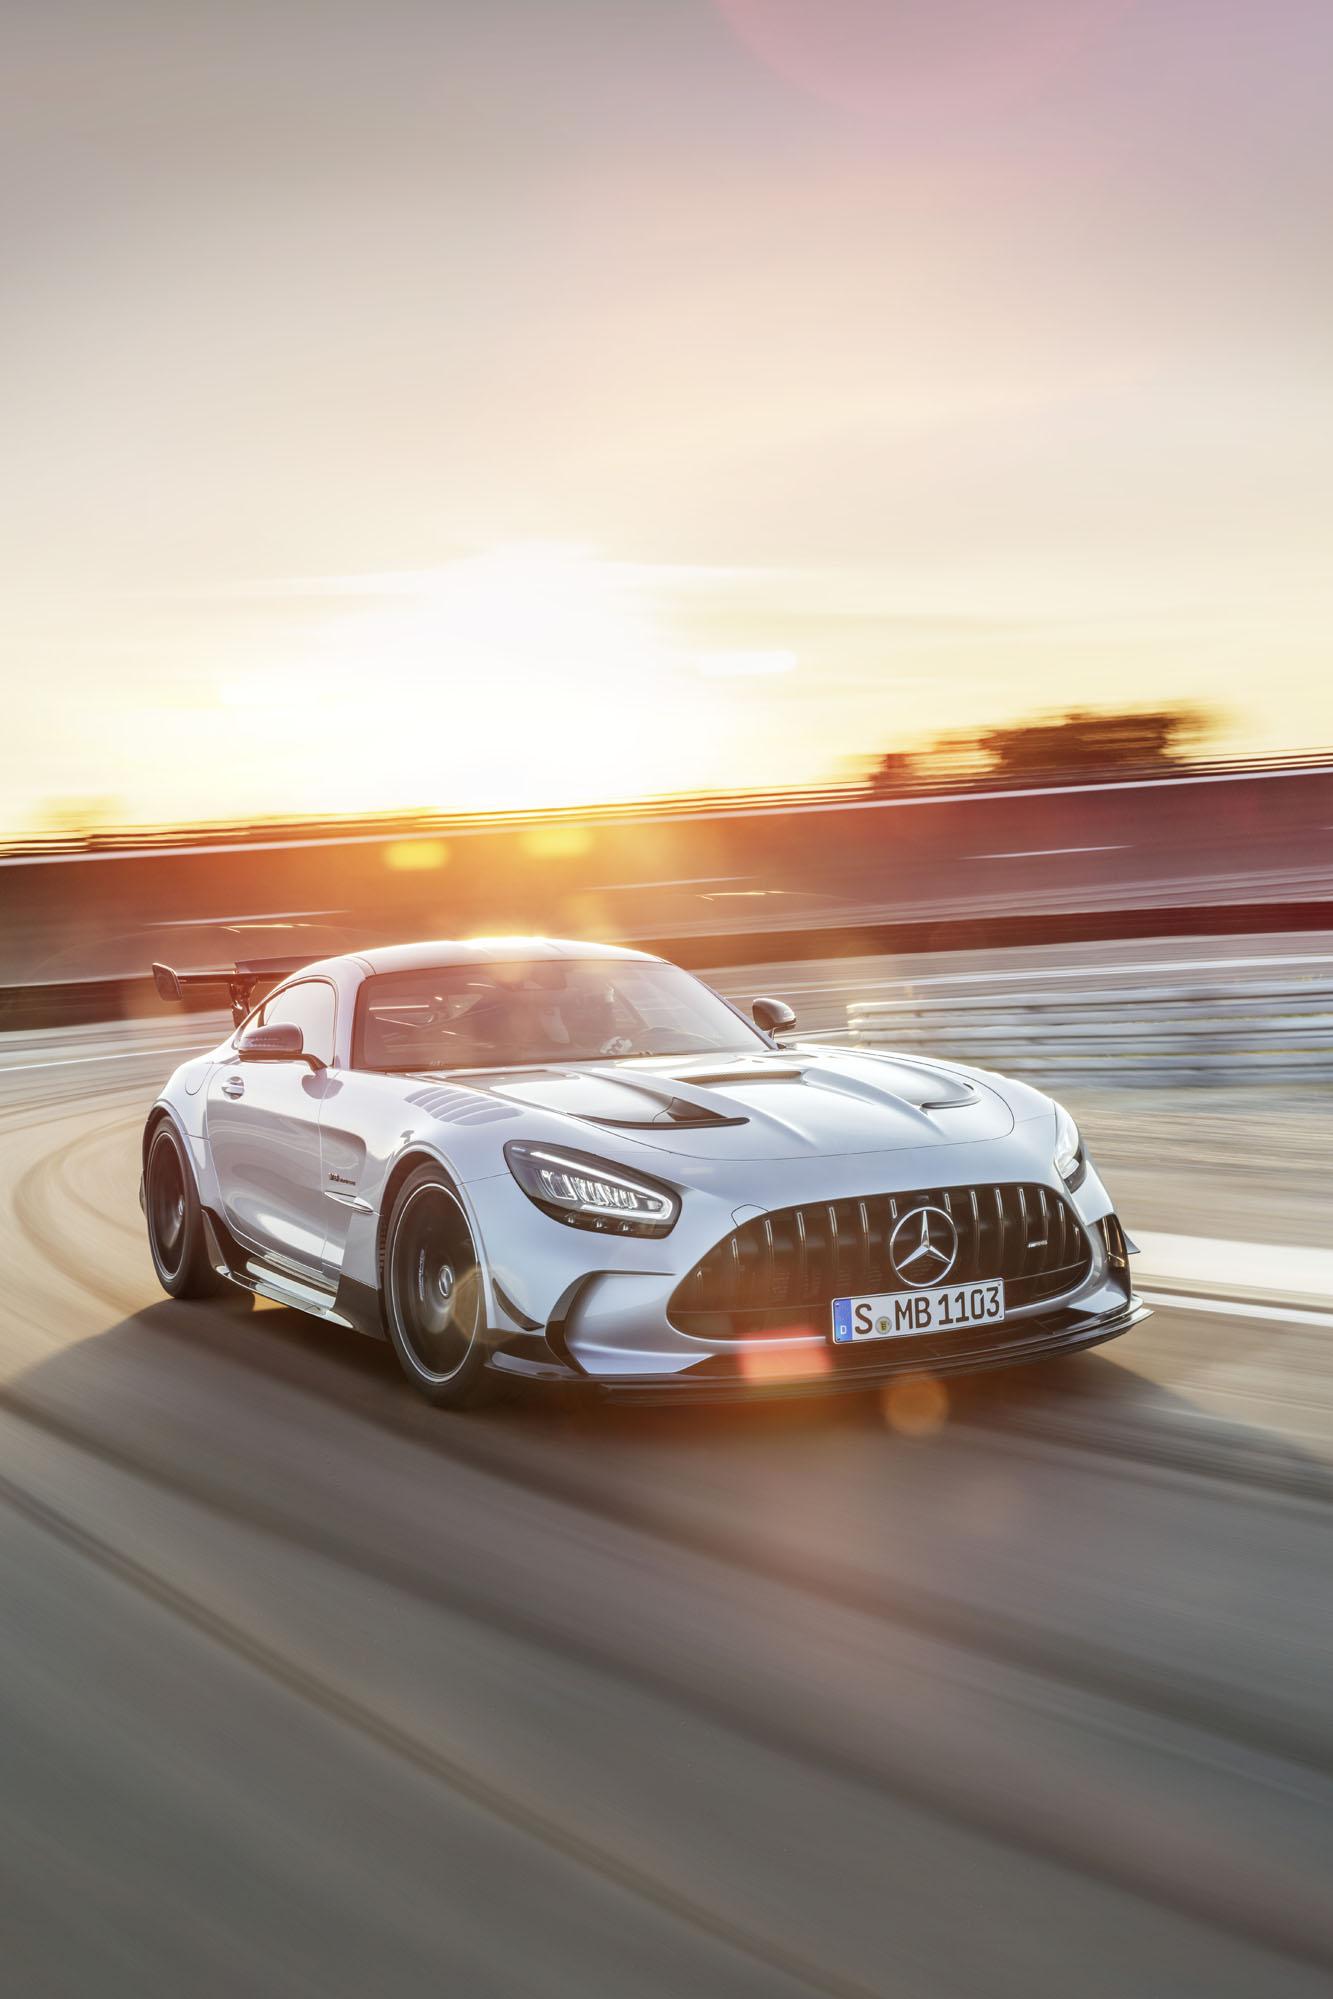 Mercedes Benz Amg Gt Black Series Picture Of